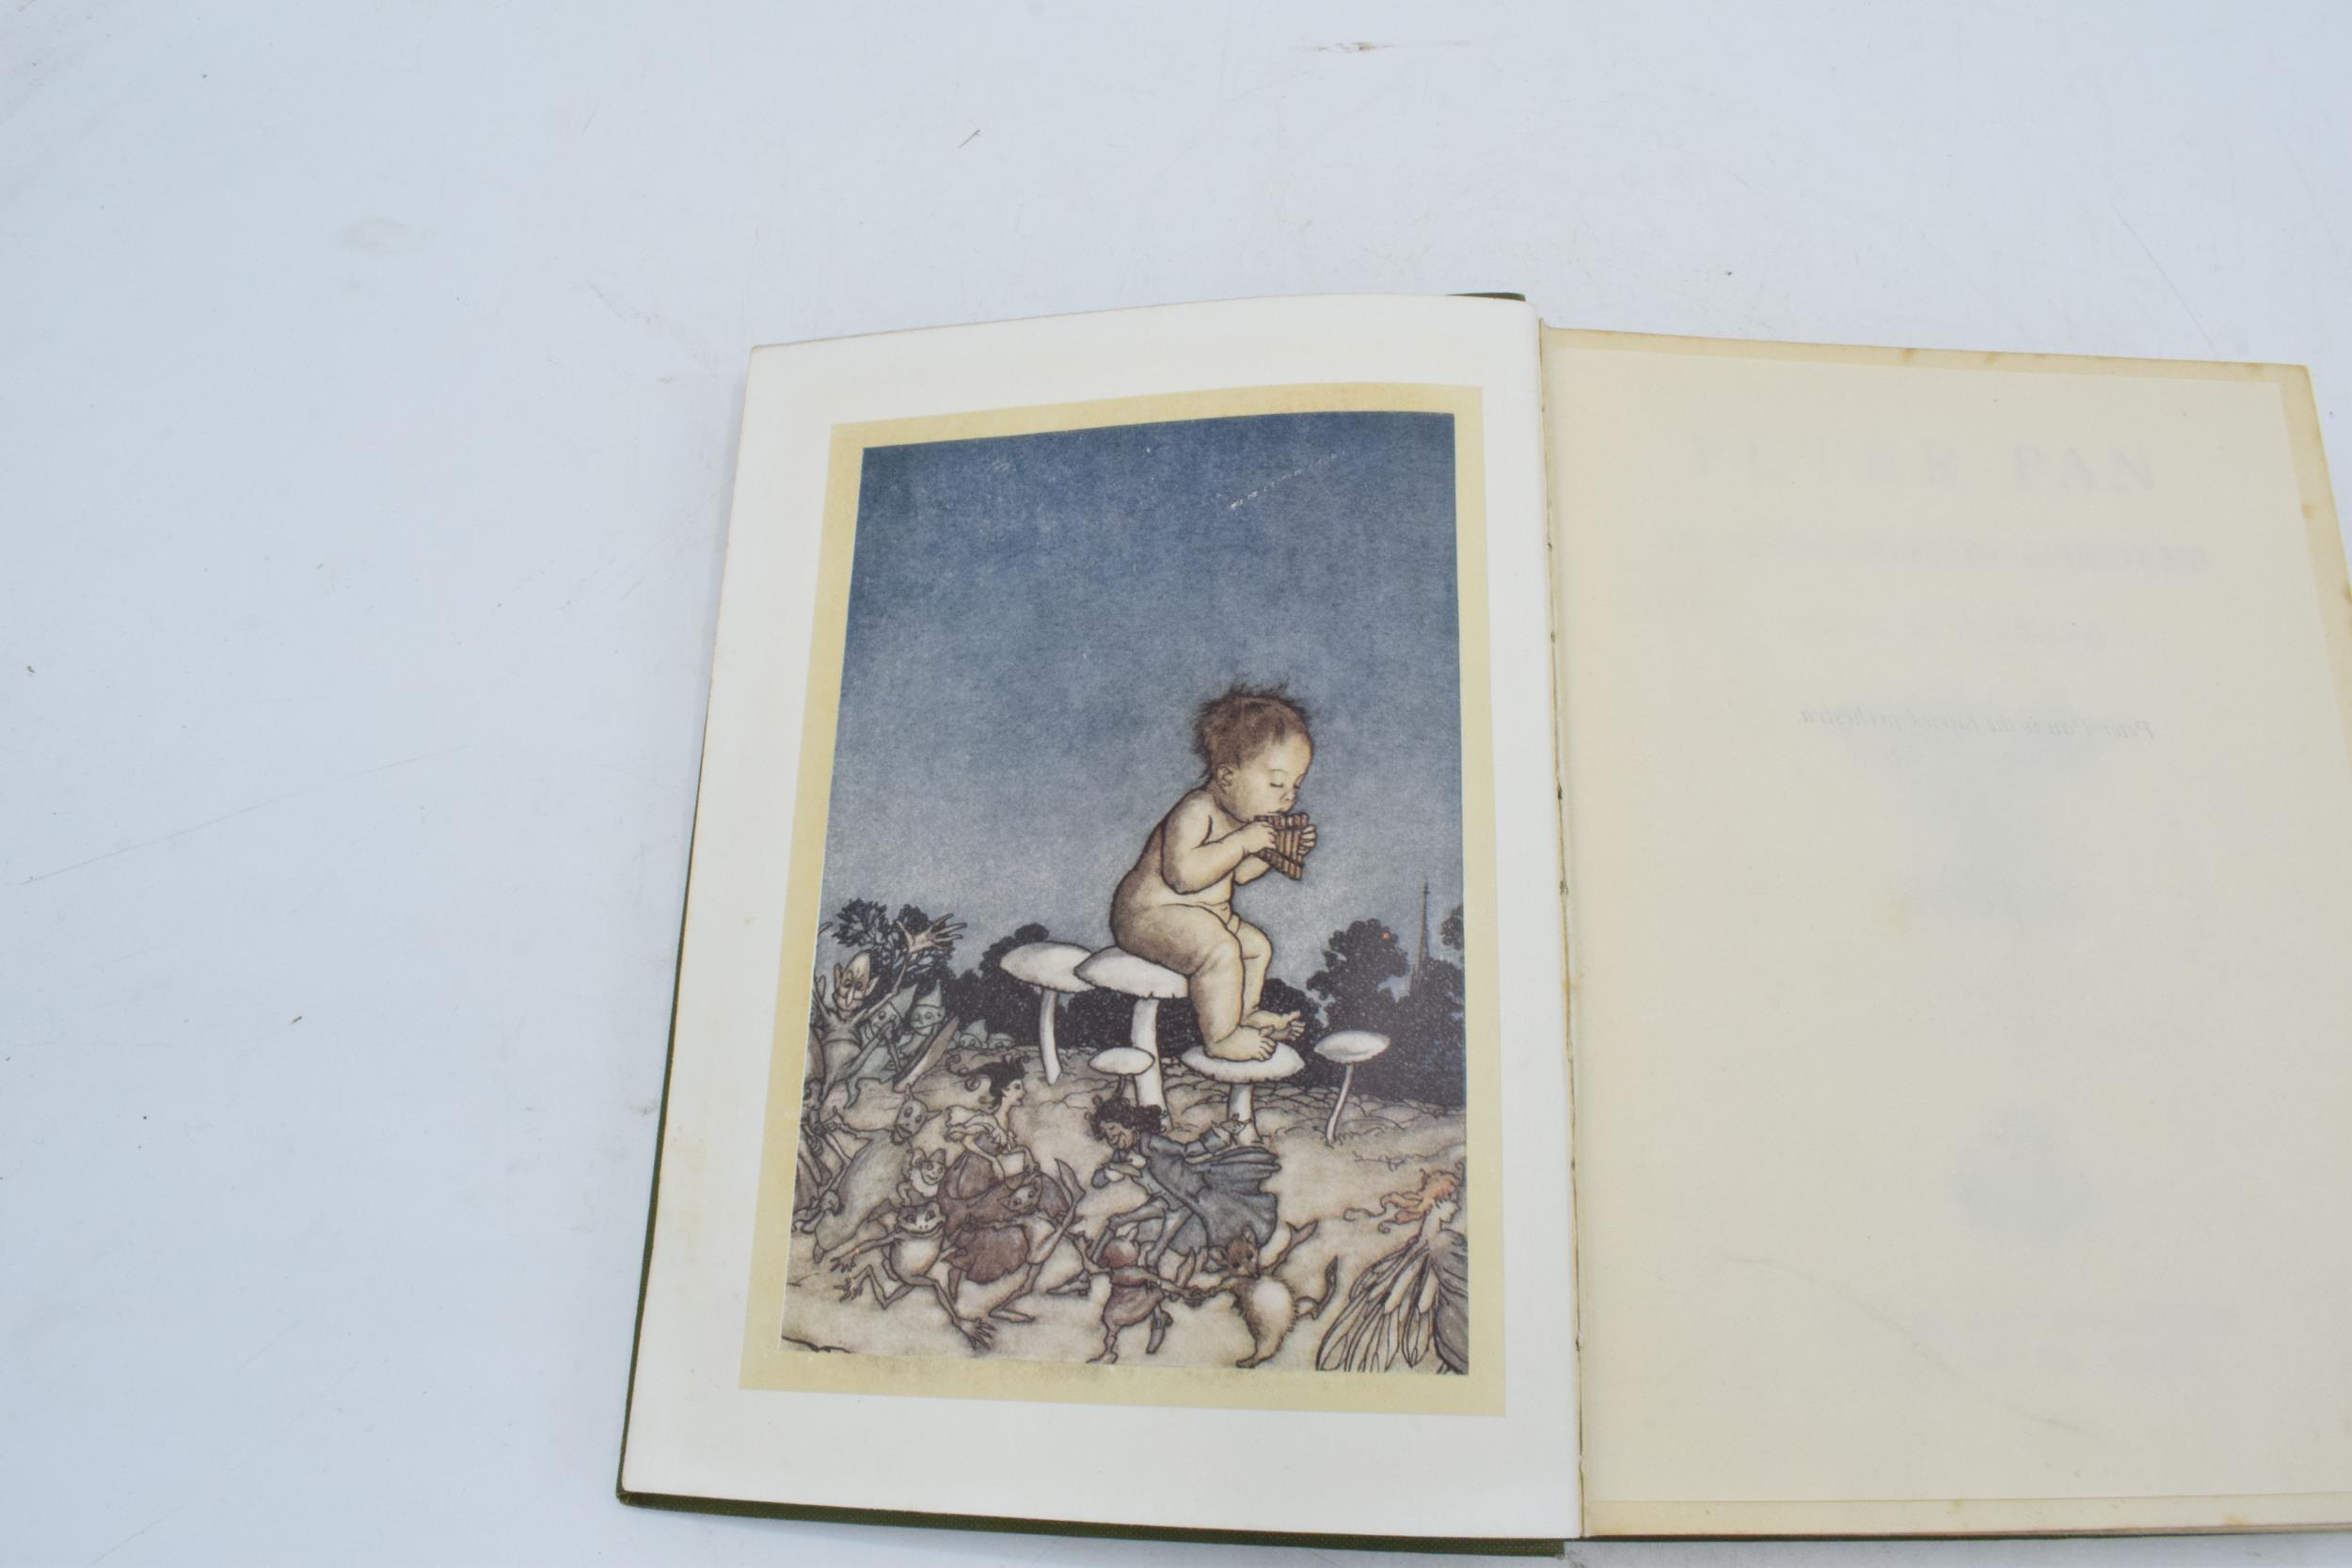 Peter Pan in Kensington Gardens by J M Barrie with illustrations by Arthur Rackham, published - Image 6 of 10